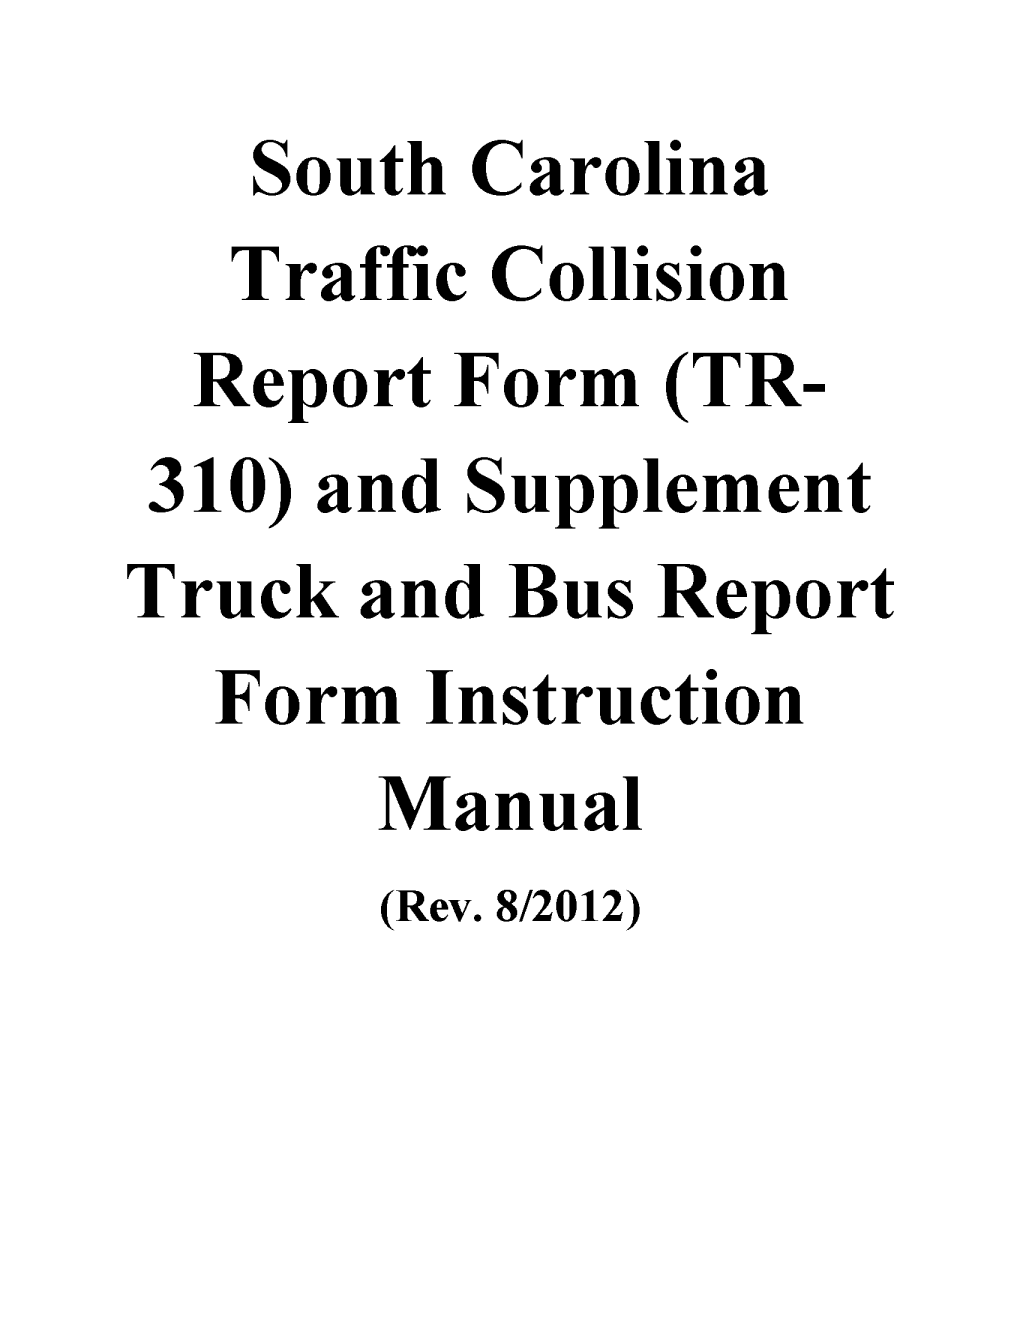 South Carolina Traffic Collision Report Form (TR- 310) and Supplement Truck and Bus Report Form Instruction Manual (Rev